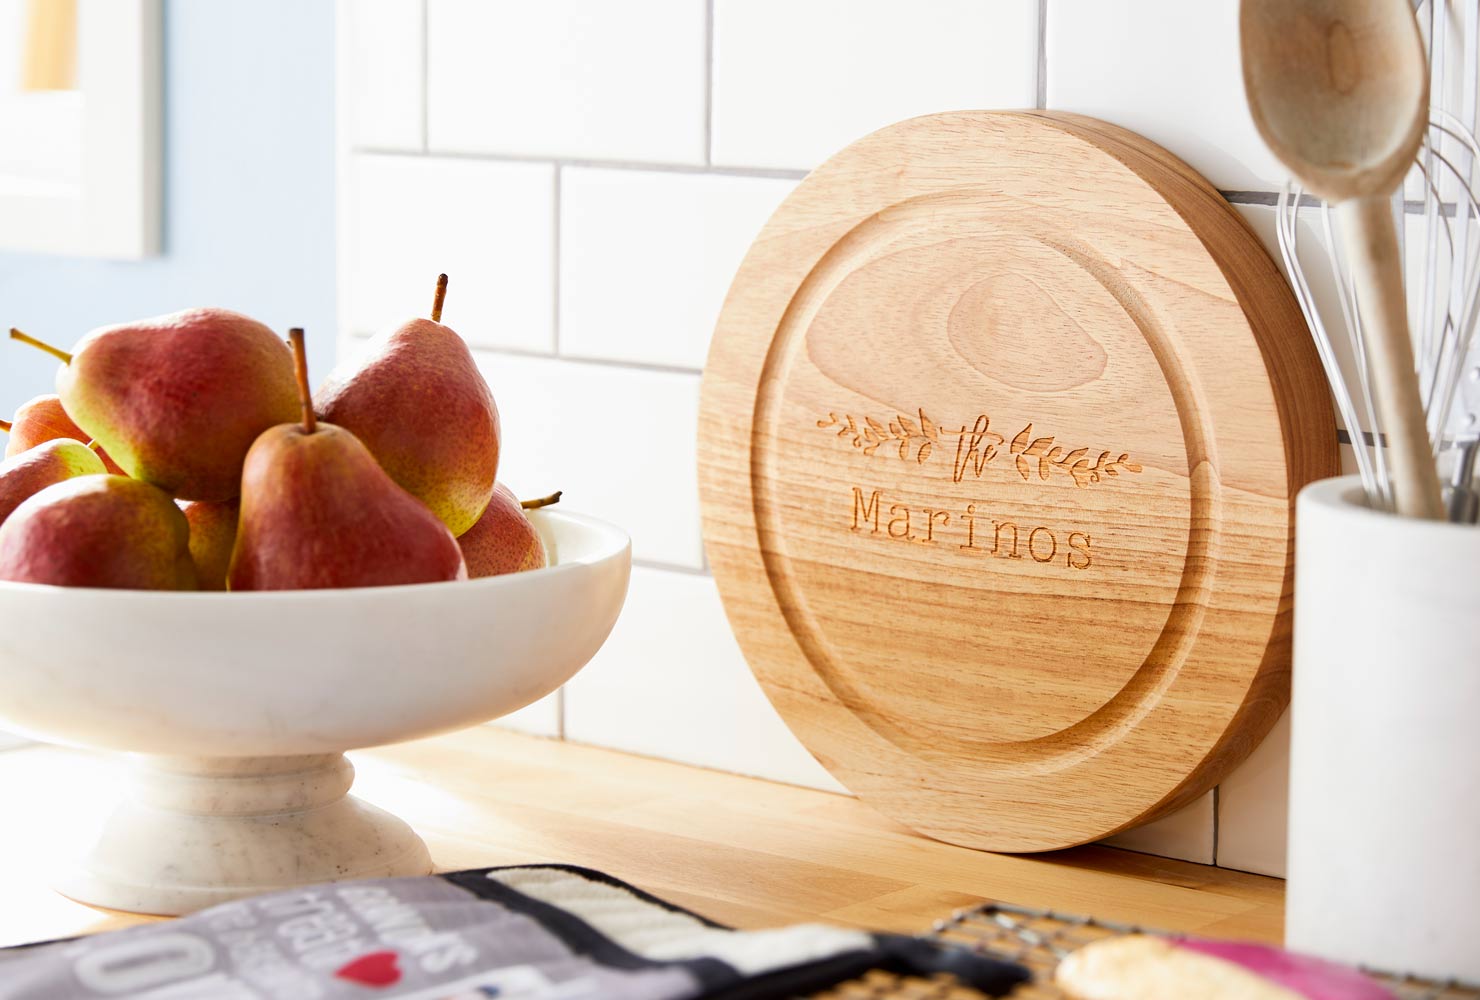 Monogrammed wooden cutting board on counter.